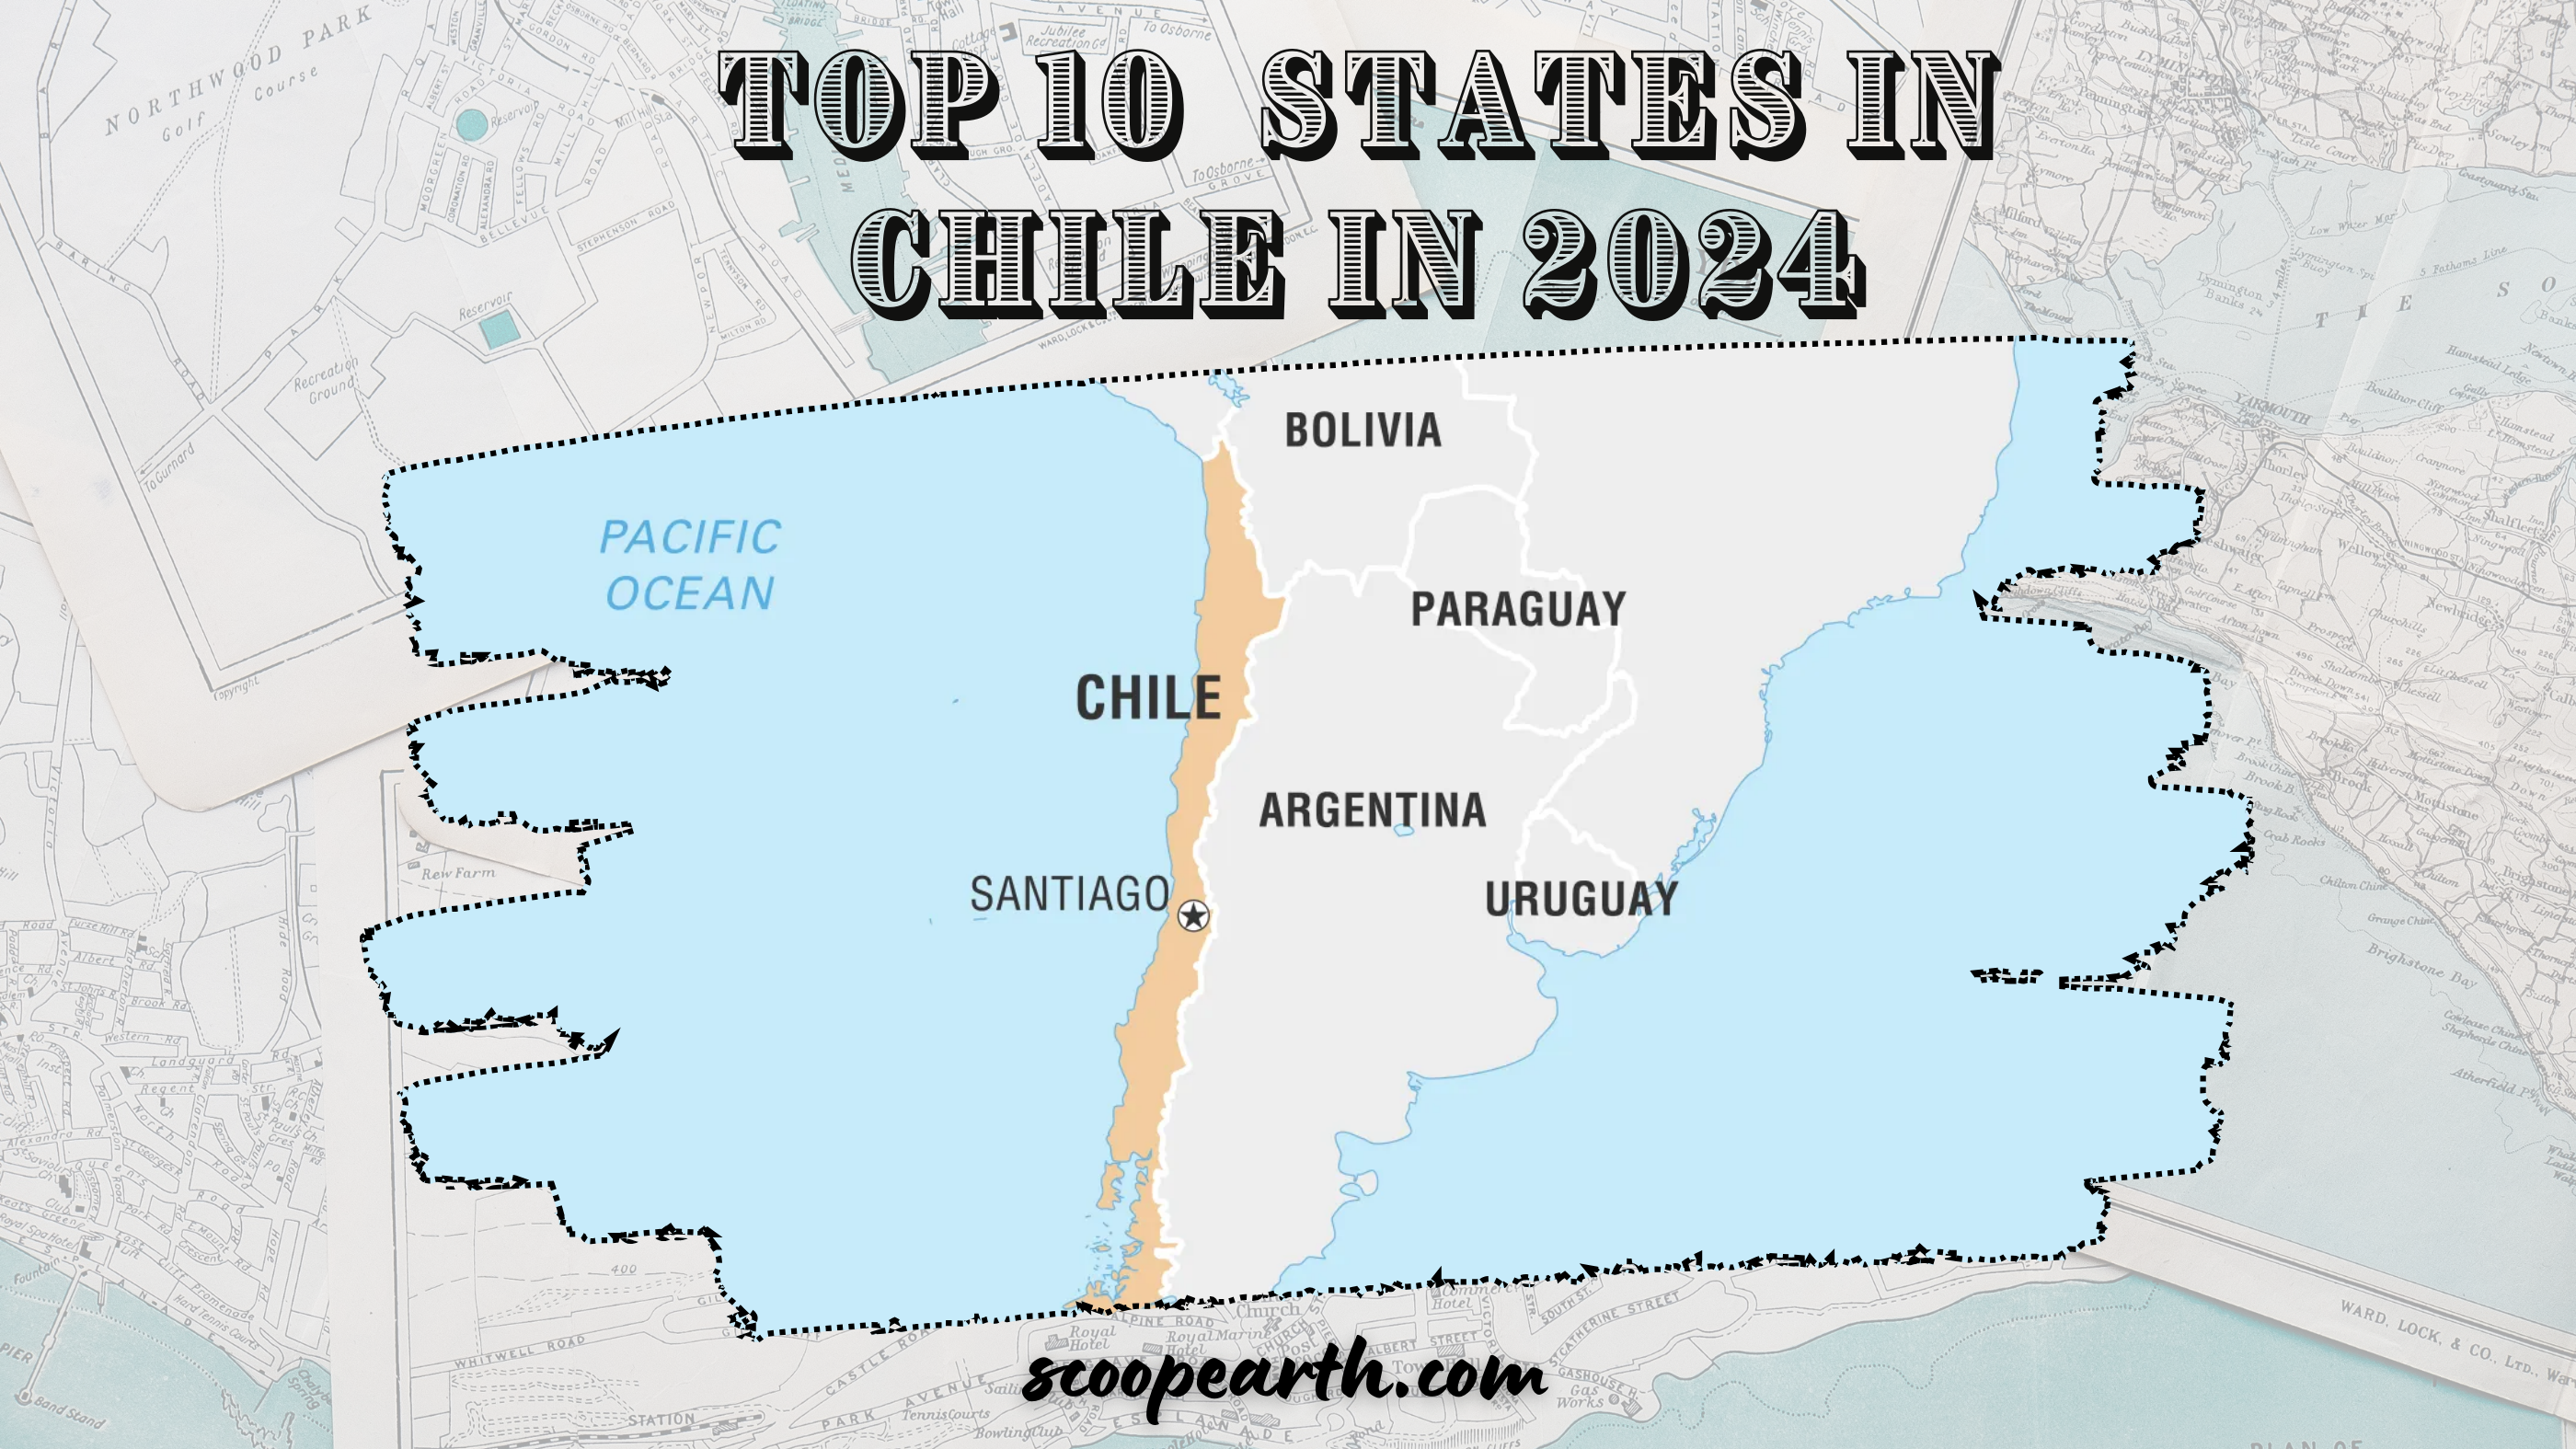 Top 10 States in Chile in 2024